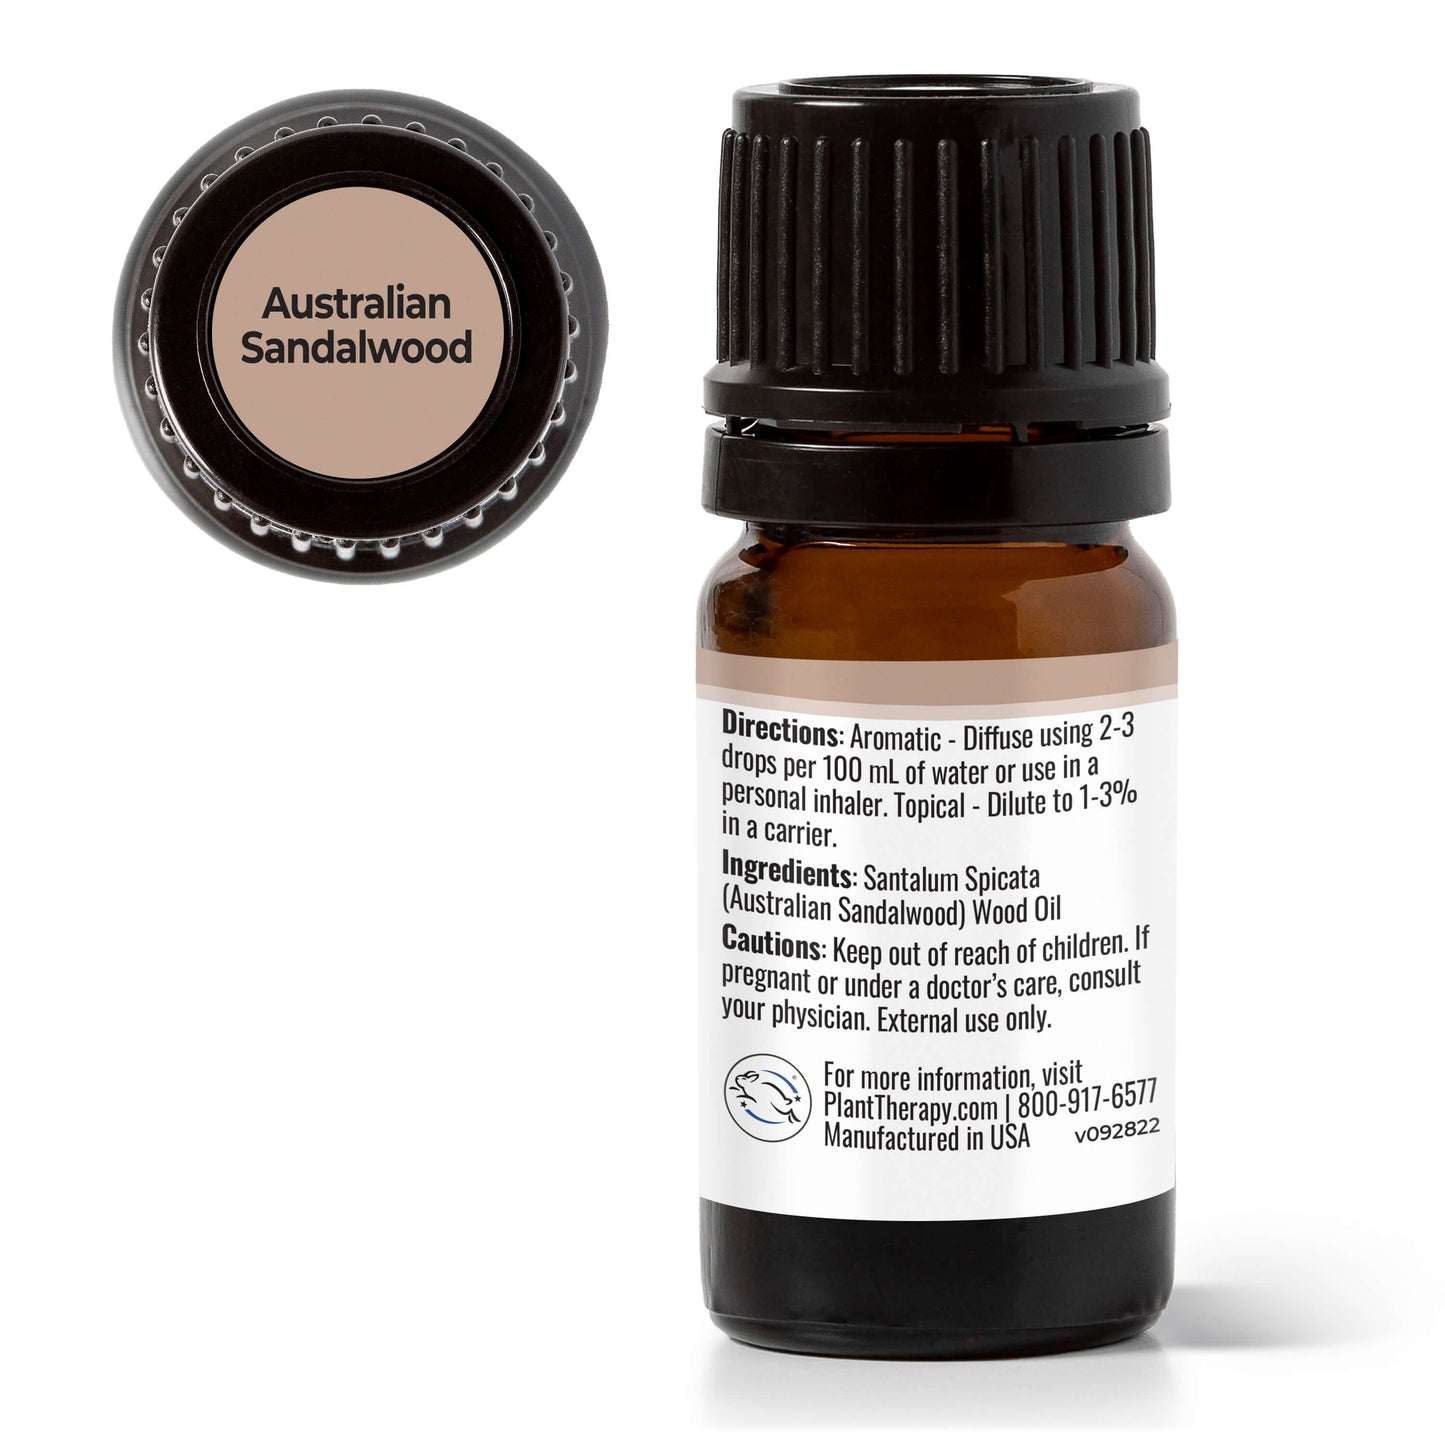 Australian Sandalwood Essential Oil back label with directions and ingredient panels